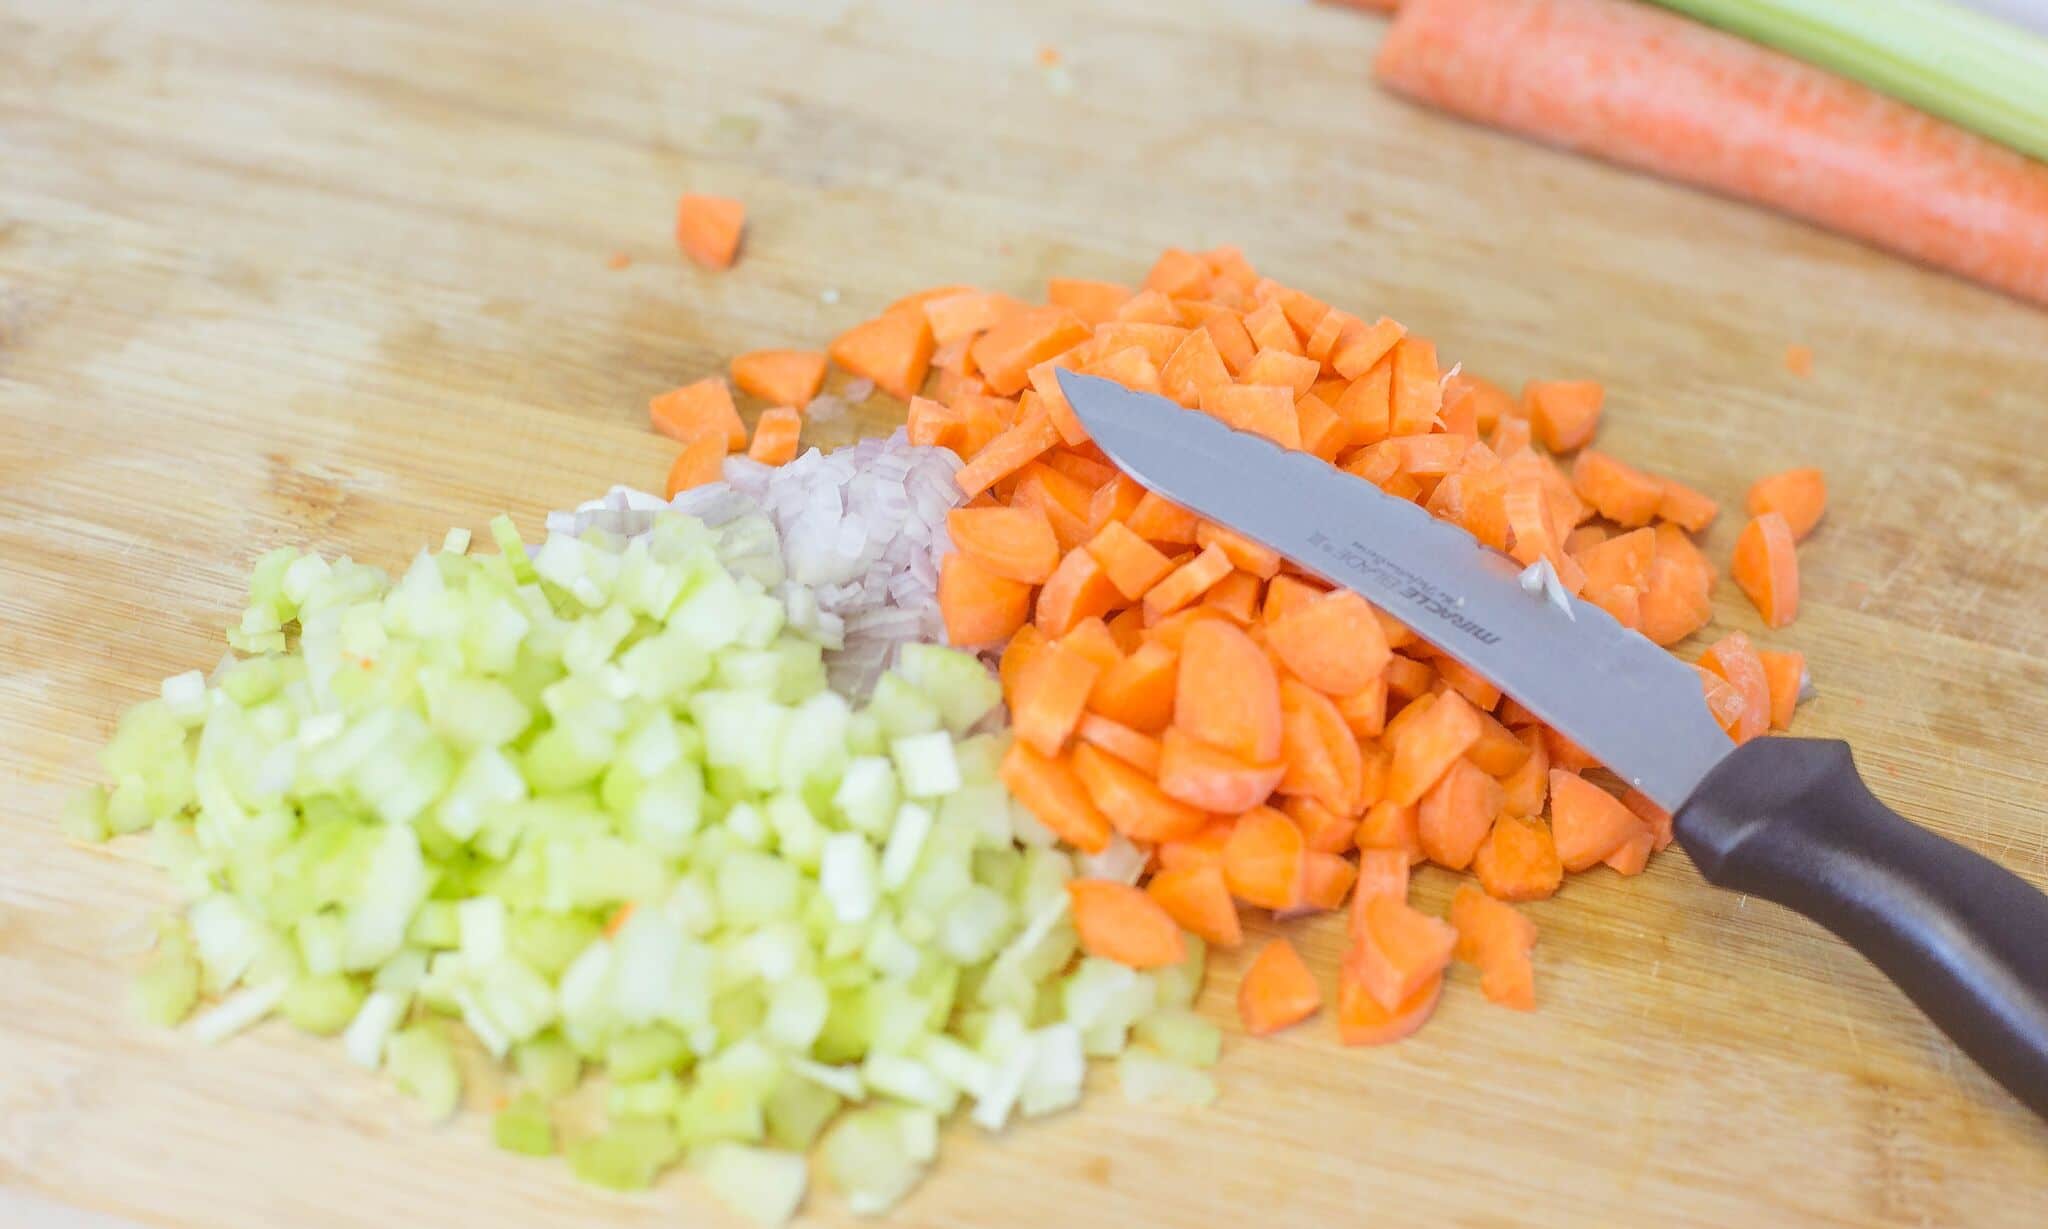 Chop shallots, celery and carrots. 